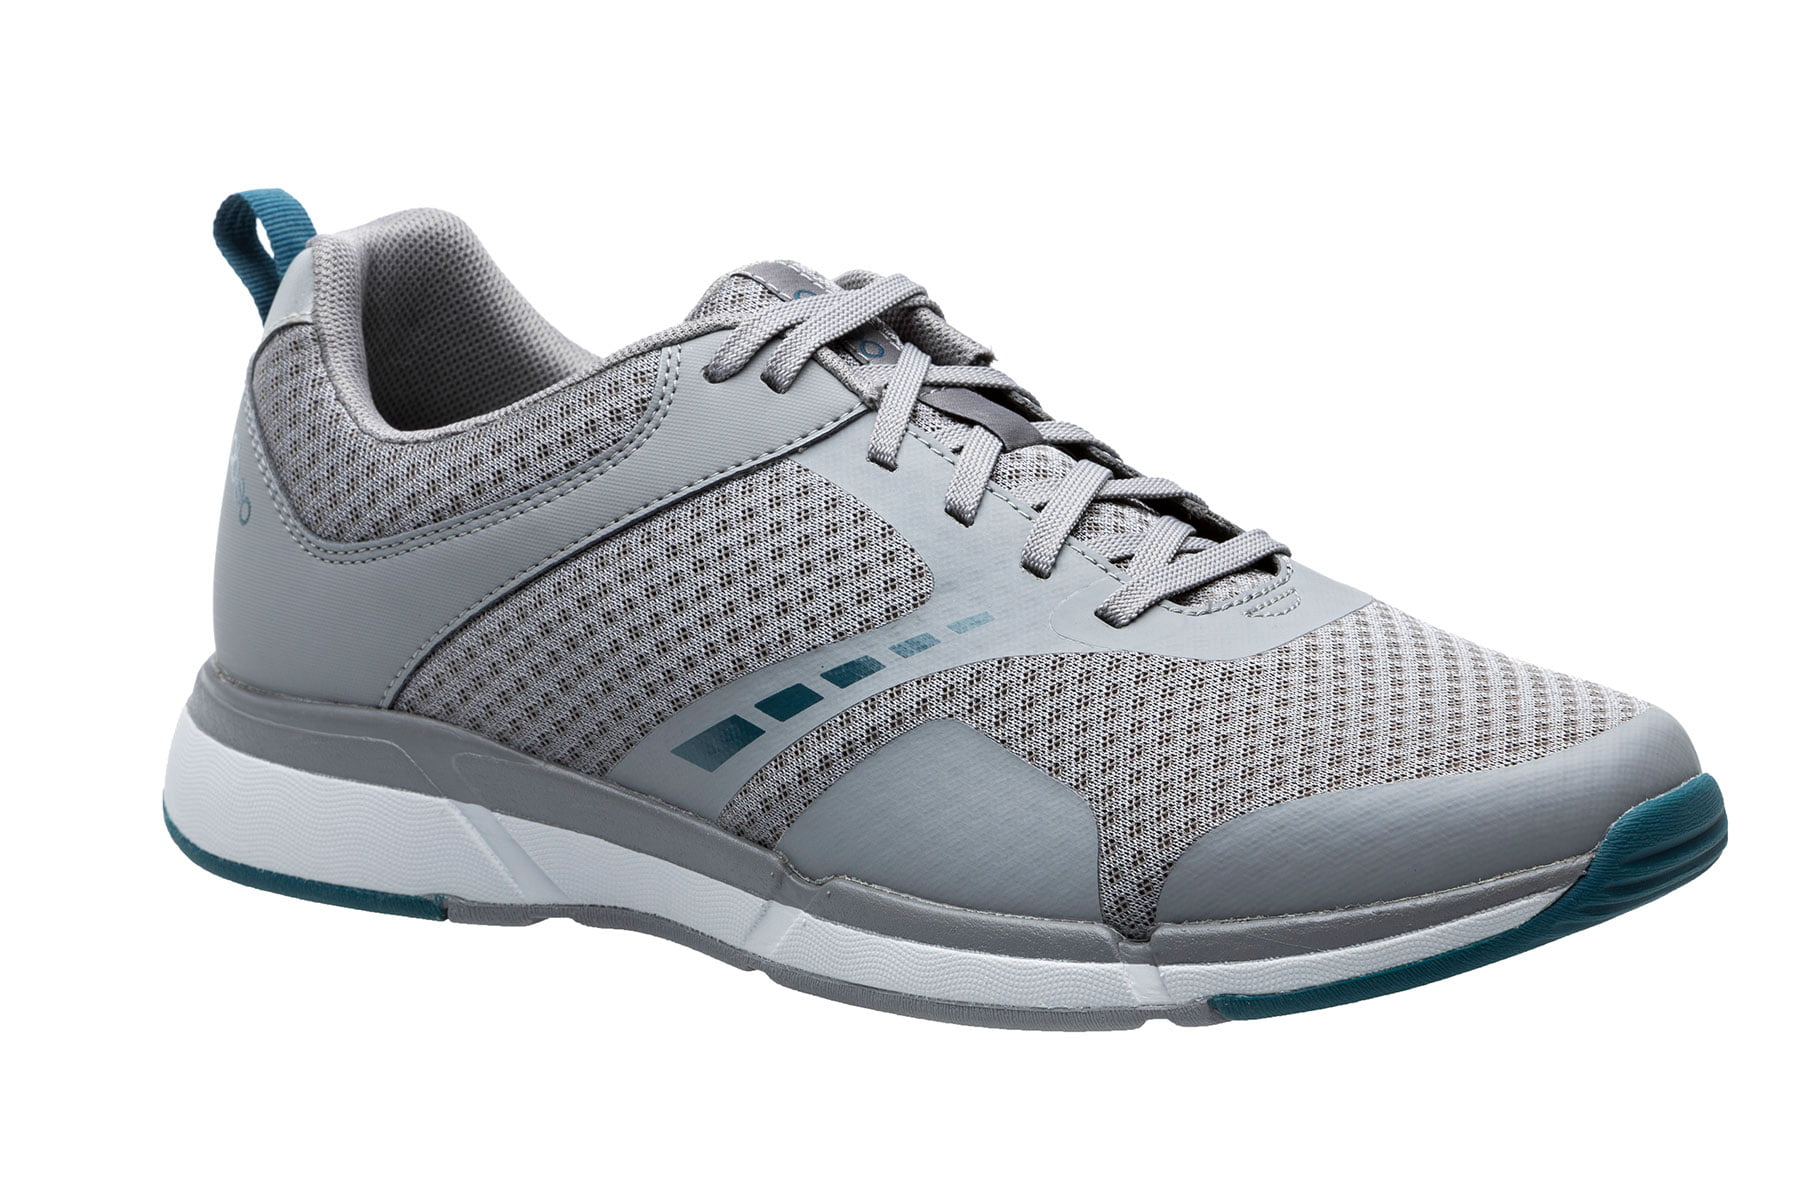 abeo athletic shoes